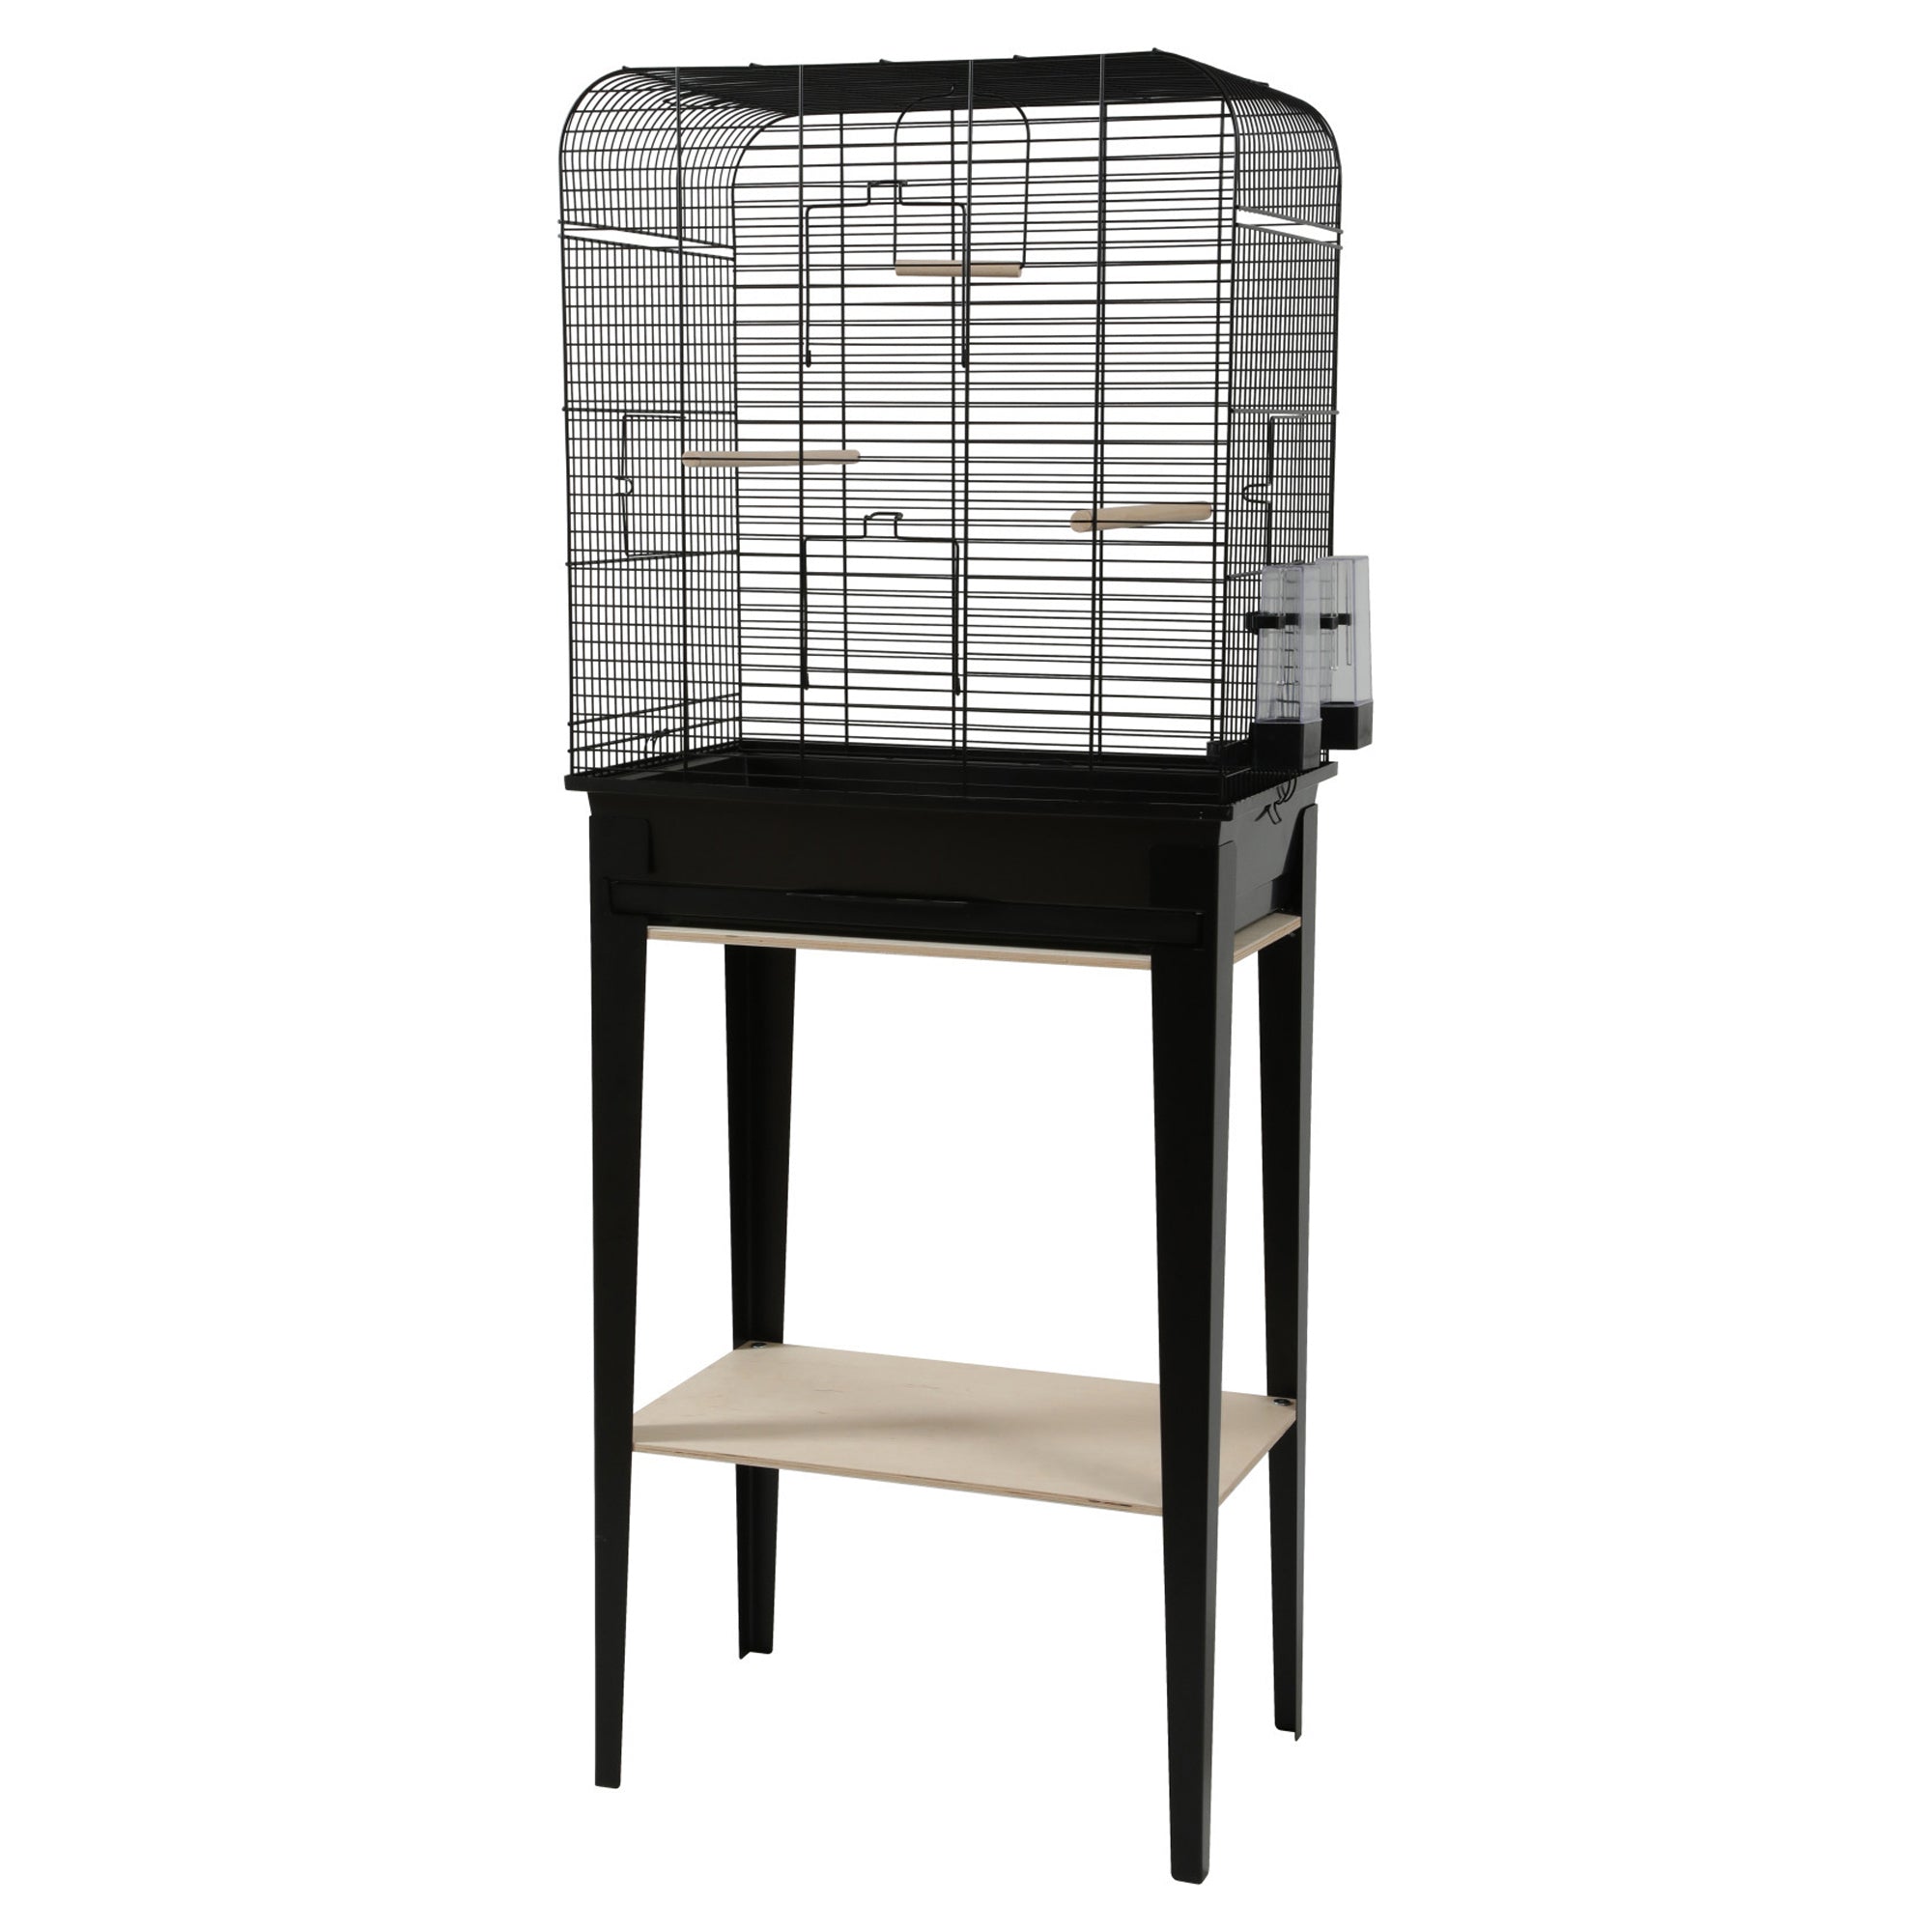 Prevue Pet Products Lincoln Bird Cage, Black : : Pet Supplies